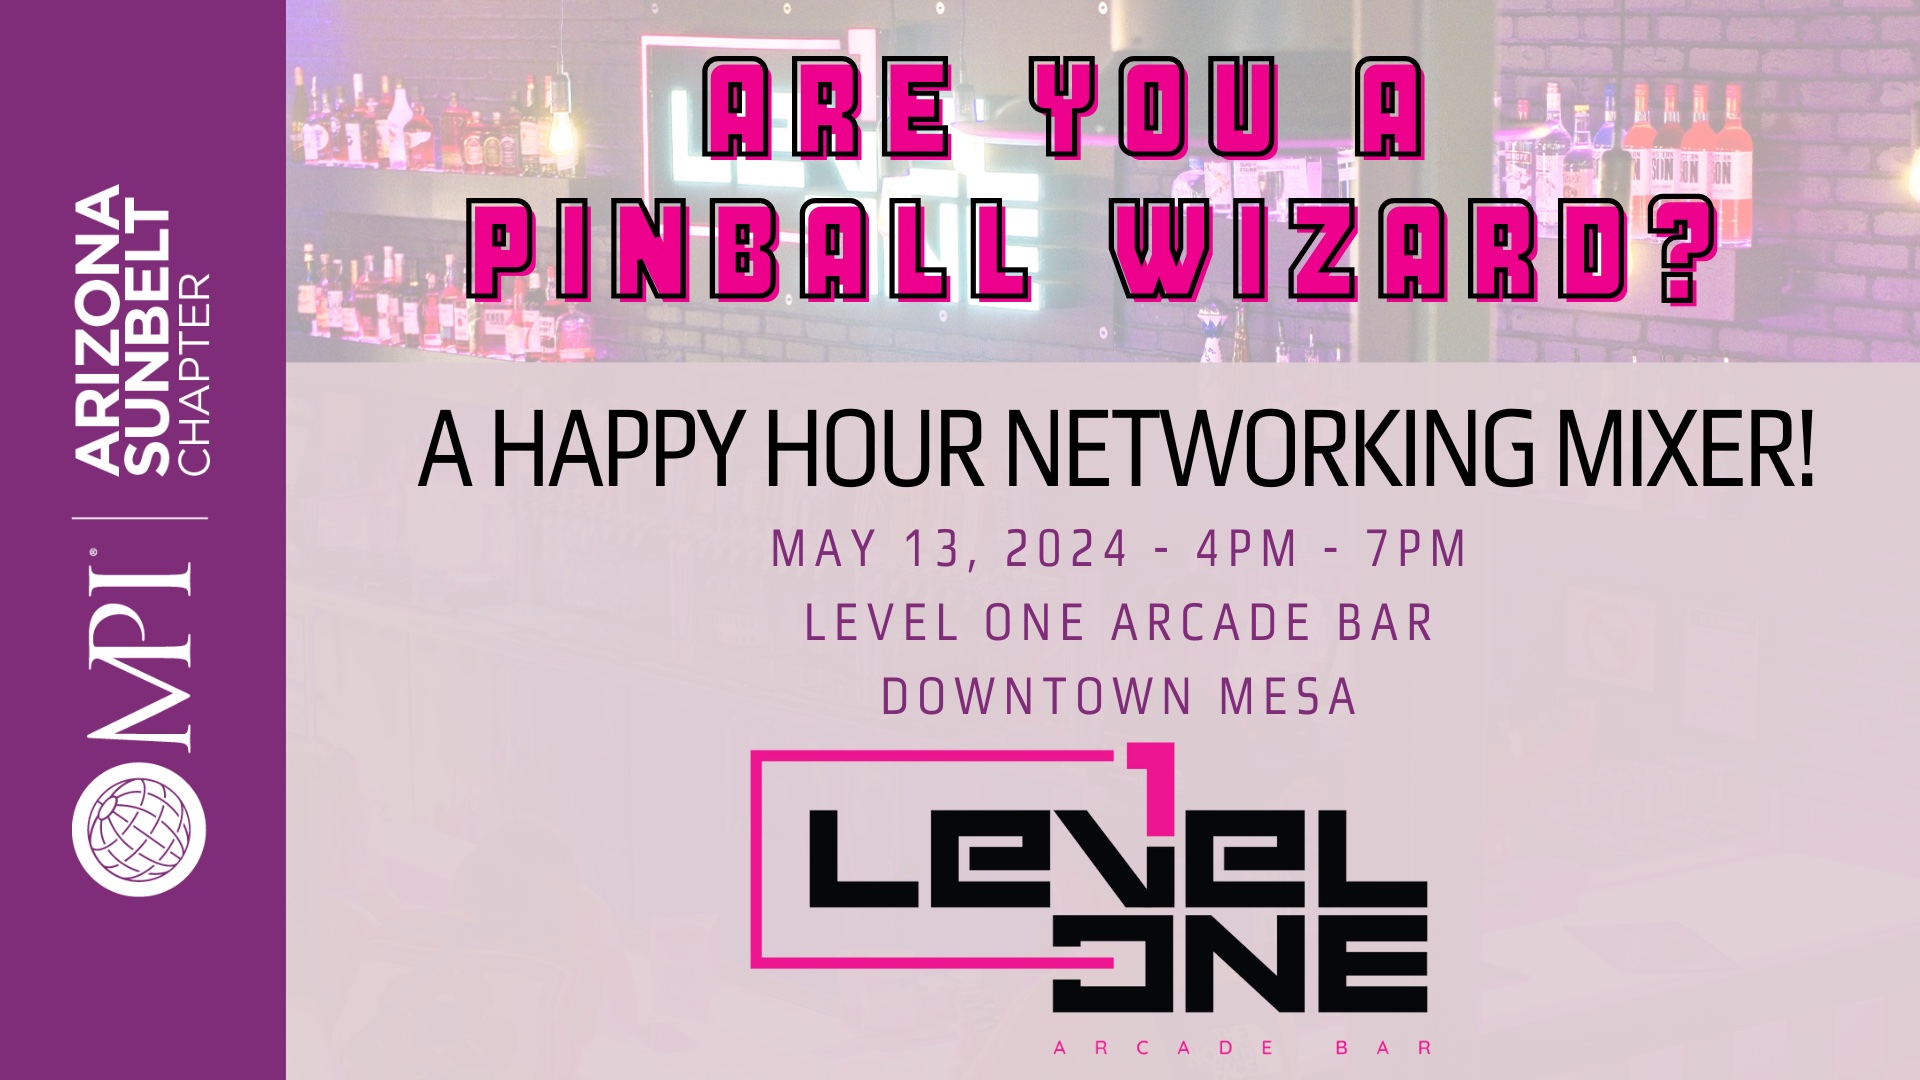 May 13, 2024 - Happy Hour Networking Mixer at Level One Arcade Bar in Downtown Mesa